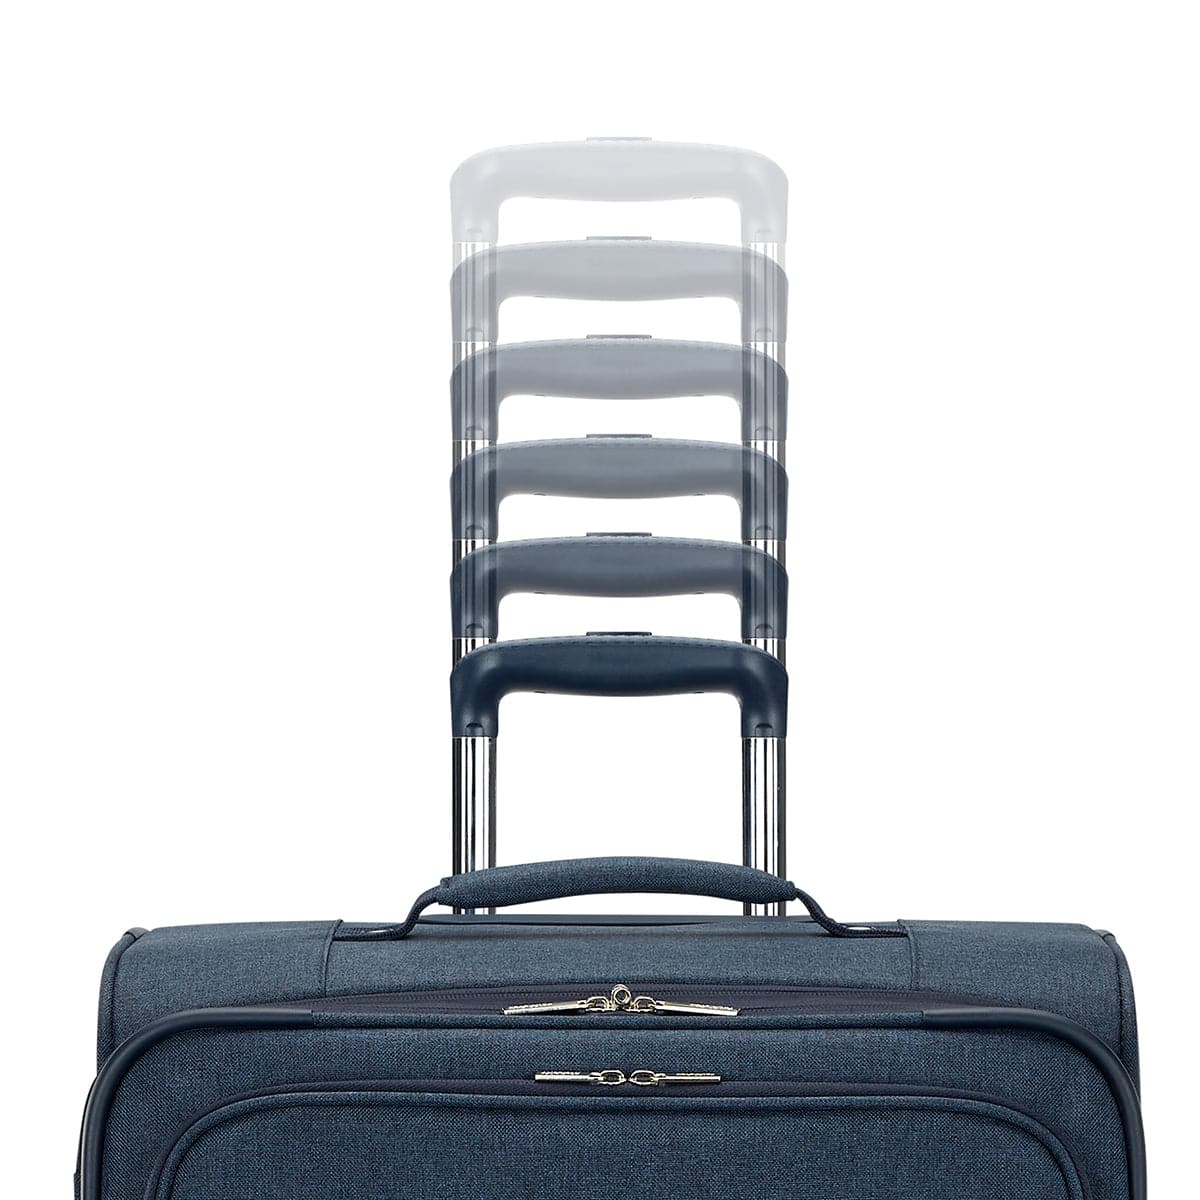 American Tourister Whim 25" Spinner